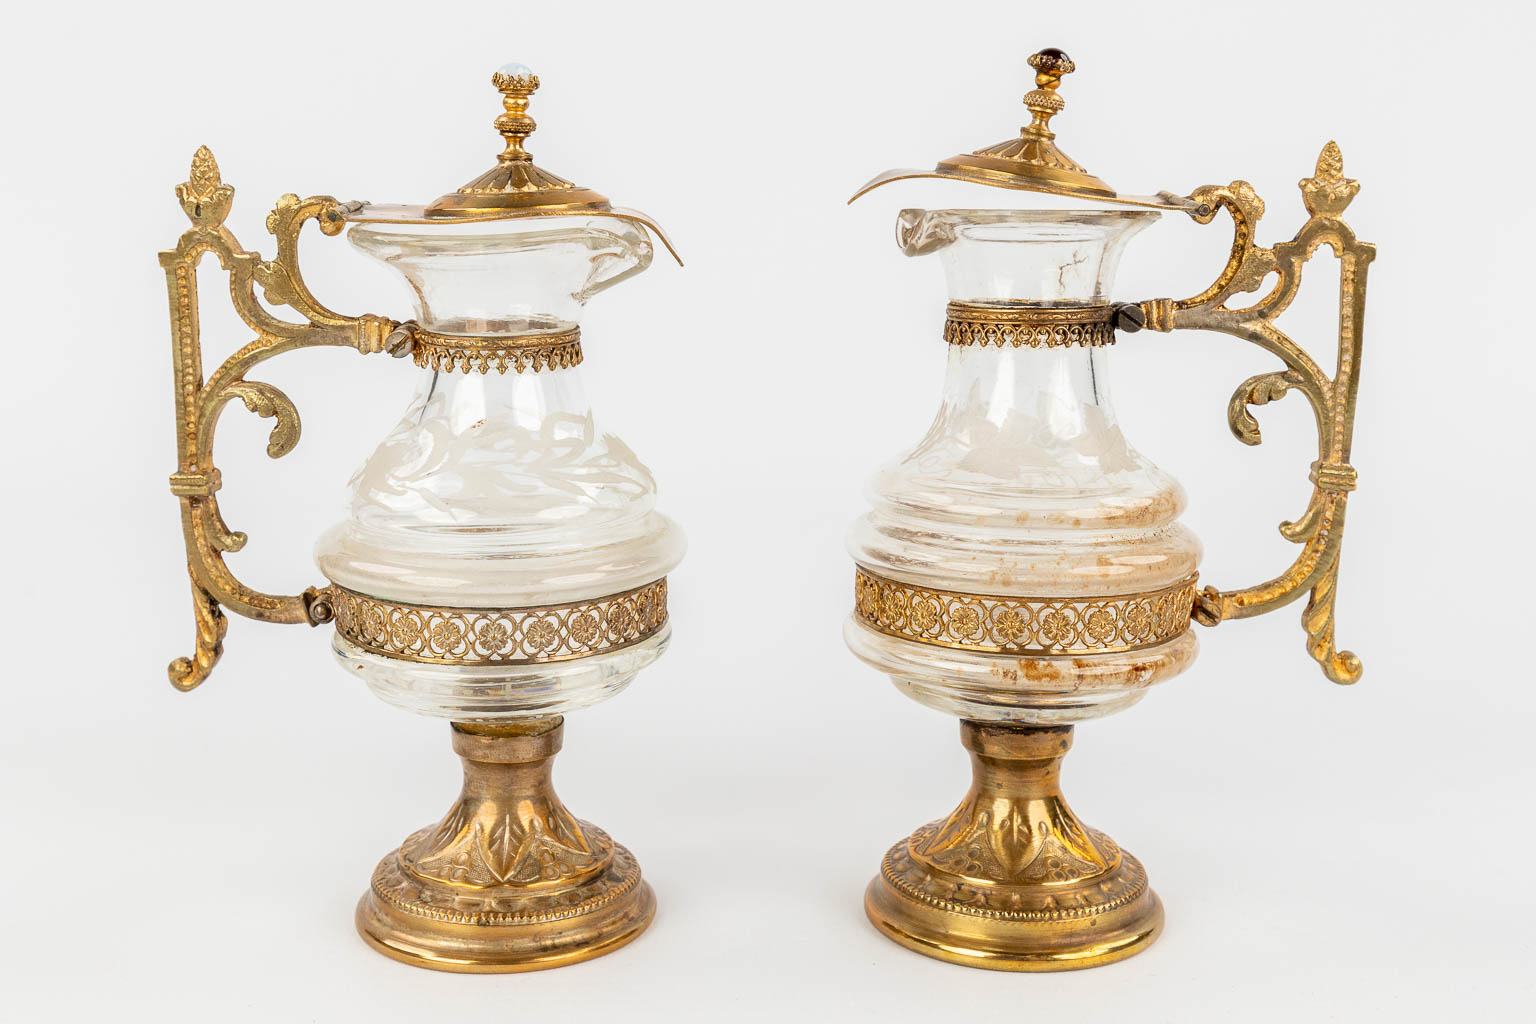 A pair of wine and water cruets made of glass and gold-plated bronze. 19th C. (L: 17 x W: 26 x H: 14 cm)